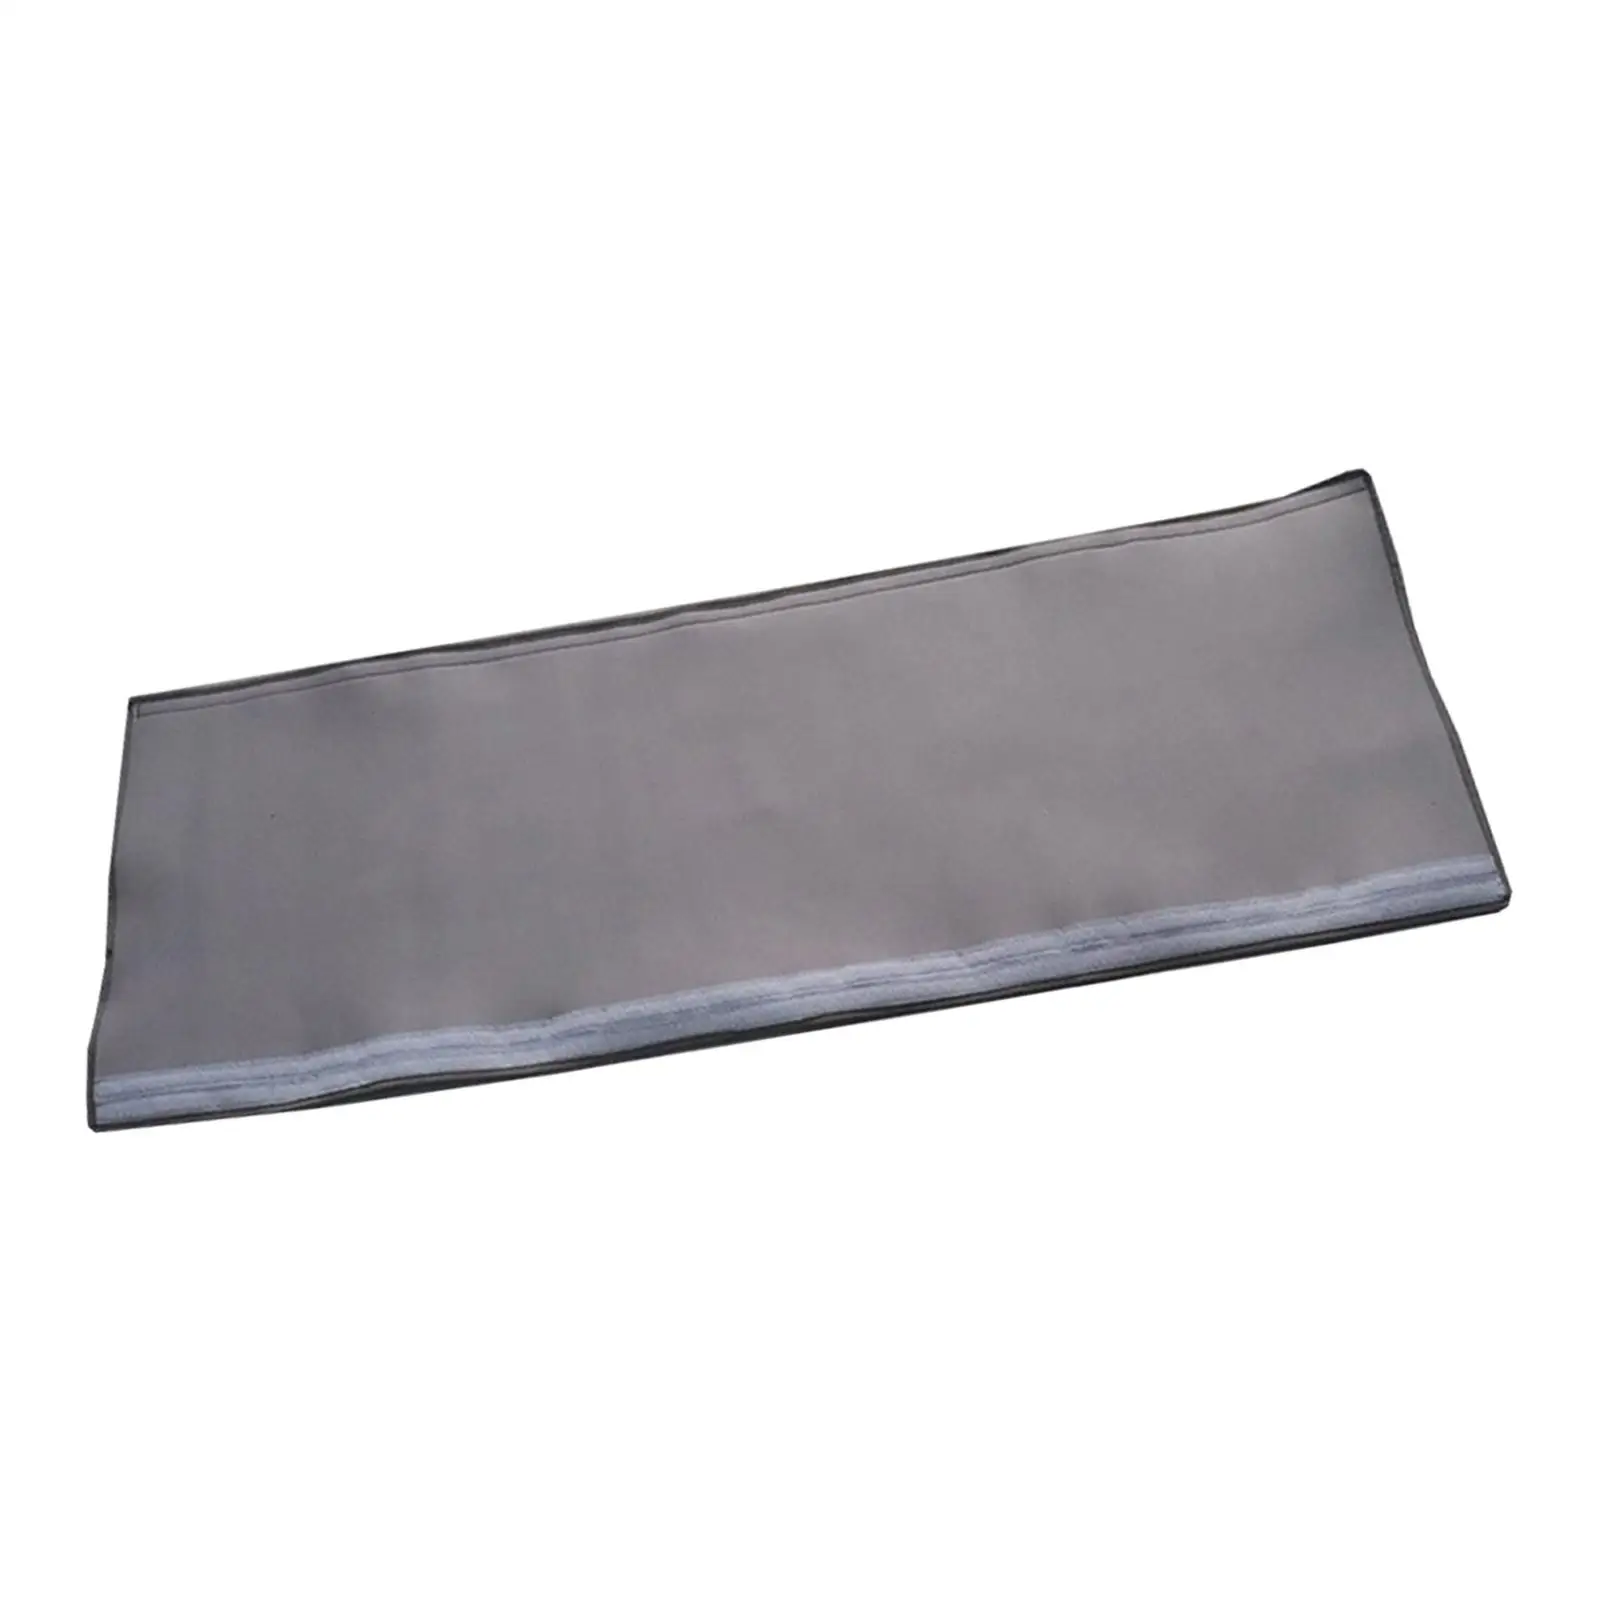 Portable Air Conditioner Insulated Cover Fits 5